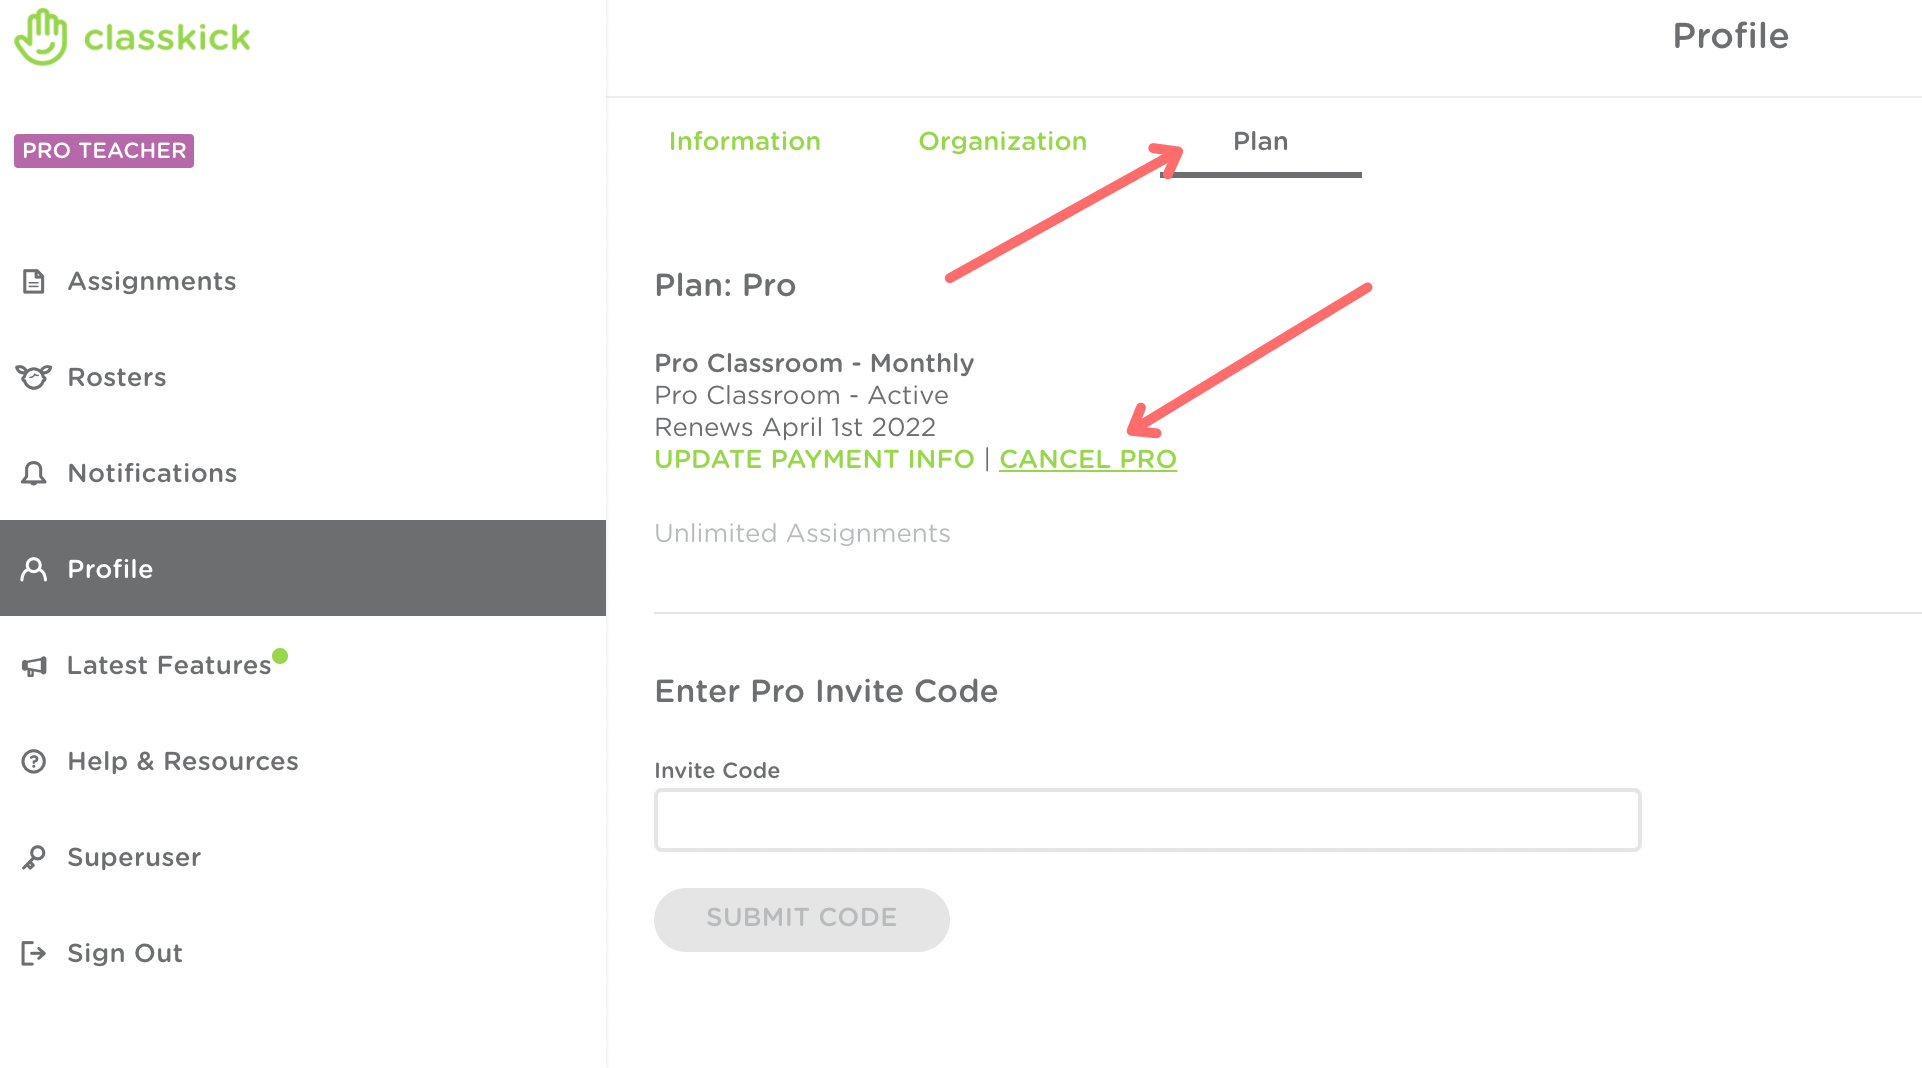 Red arrows point to the Plan tab in the Profile section and an option to cancel pro.